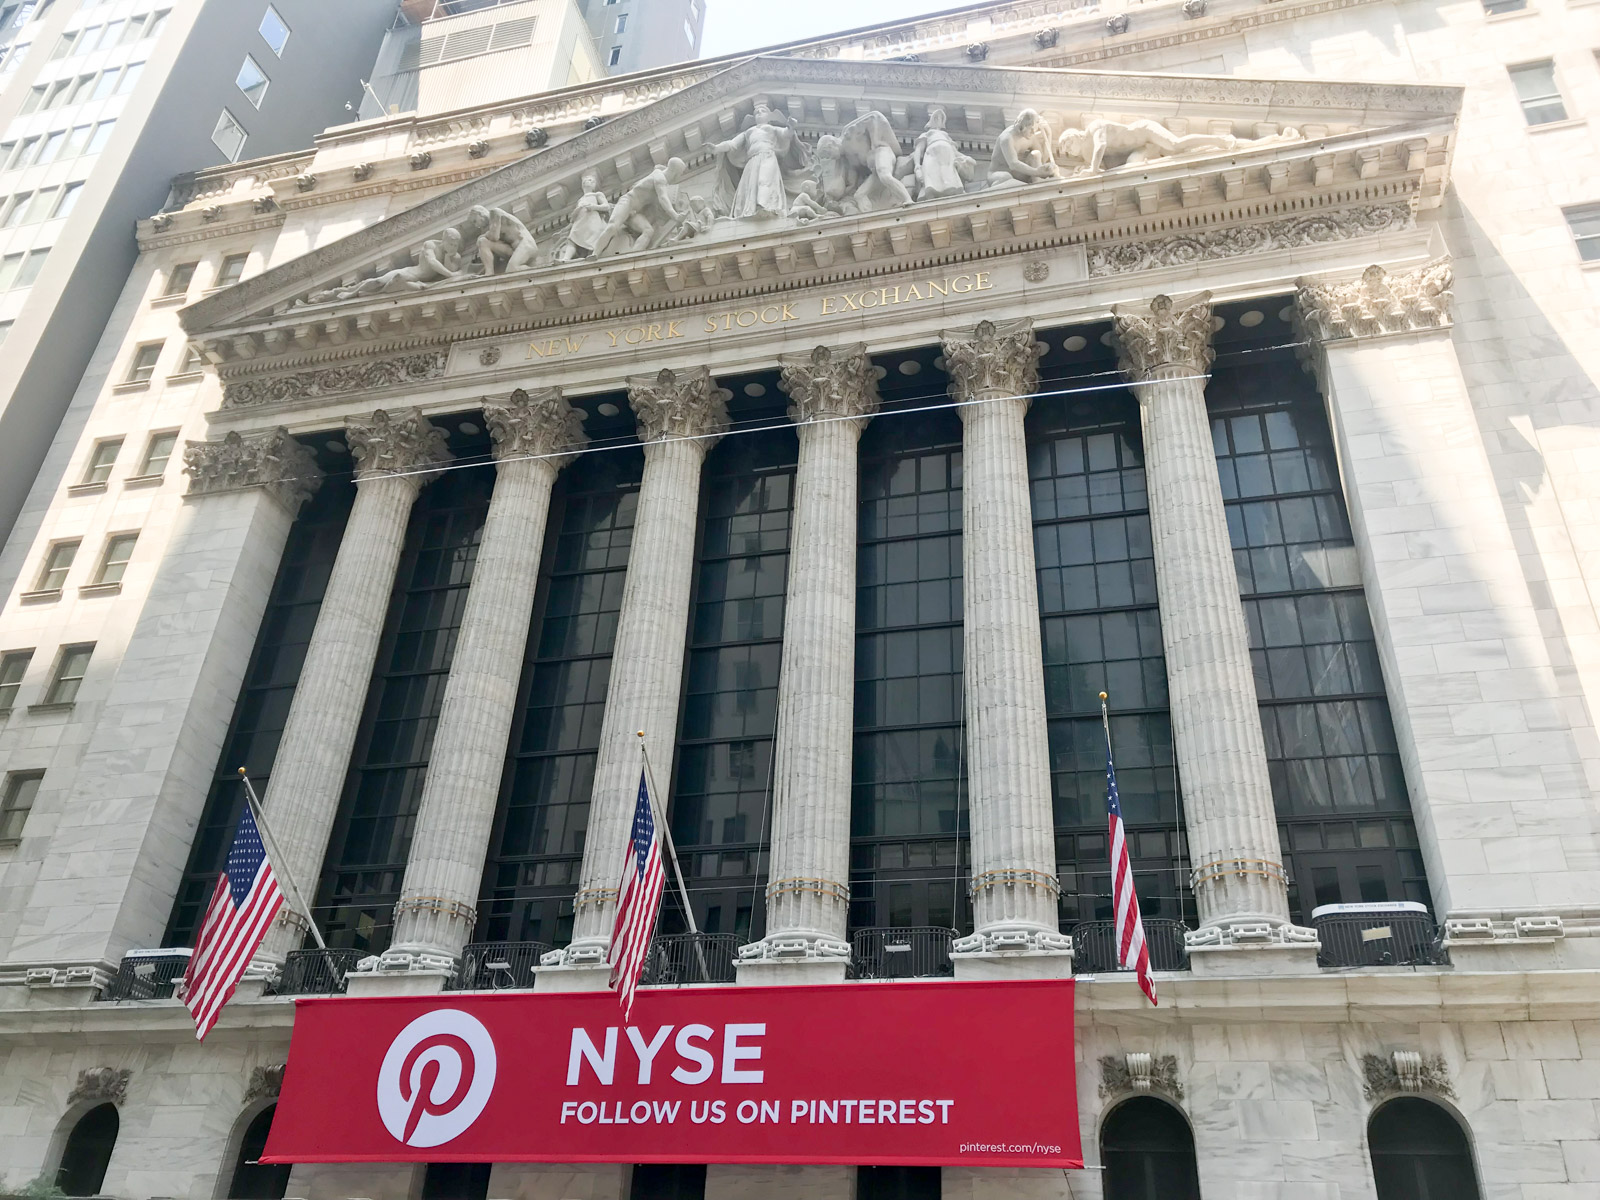 A traditional stone building with lettering “New York Stock Exchange”. Its front resembles pillars and tall windows